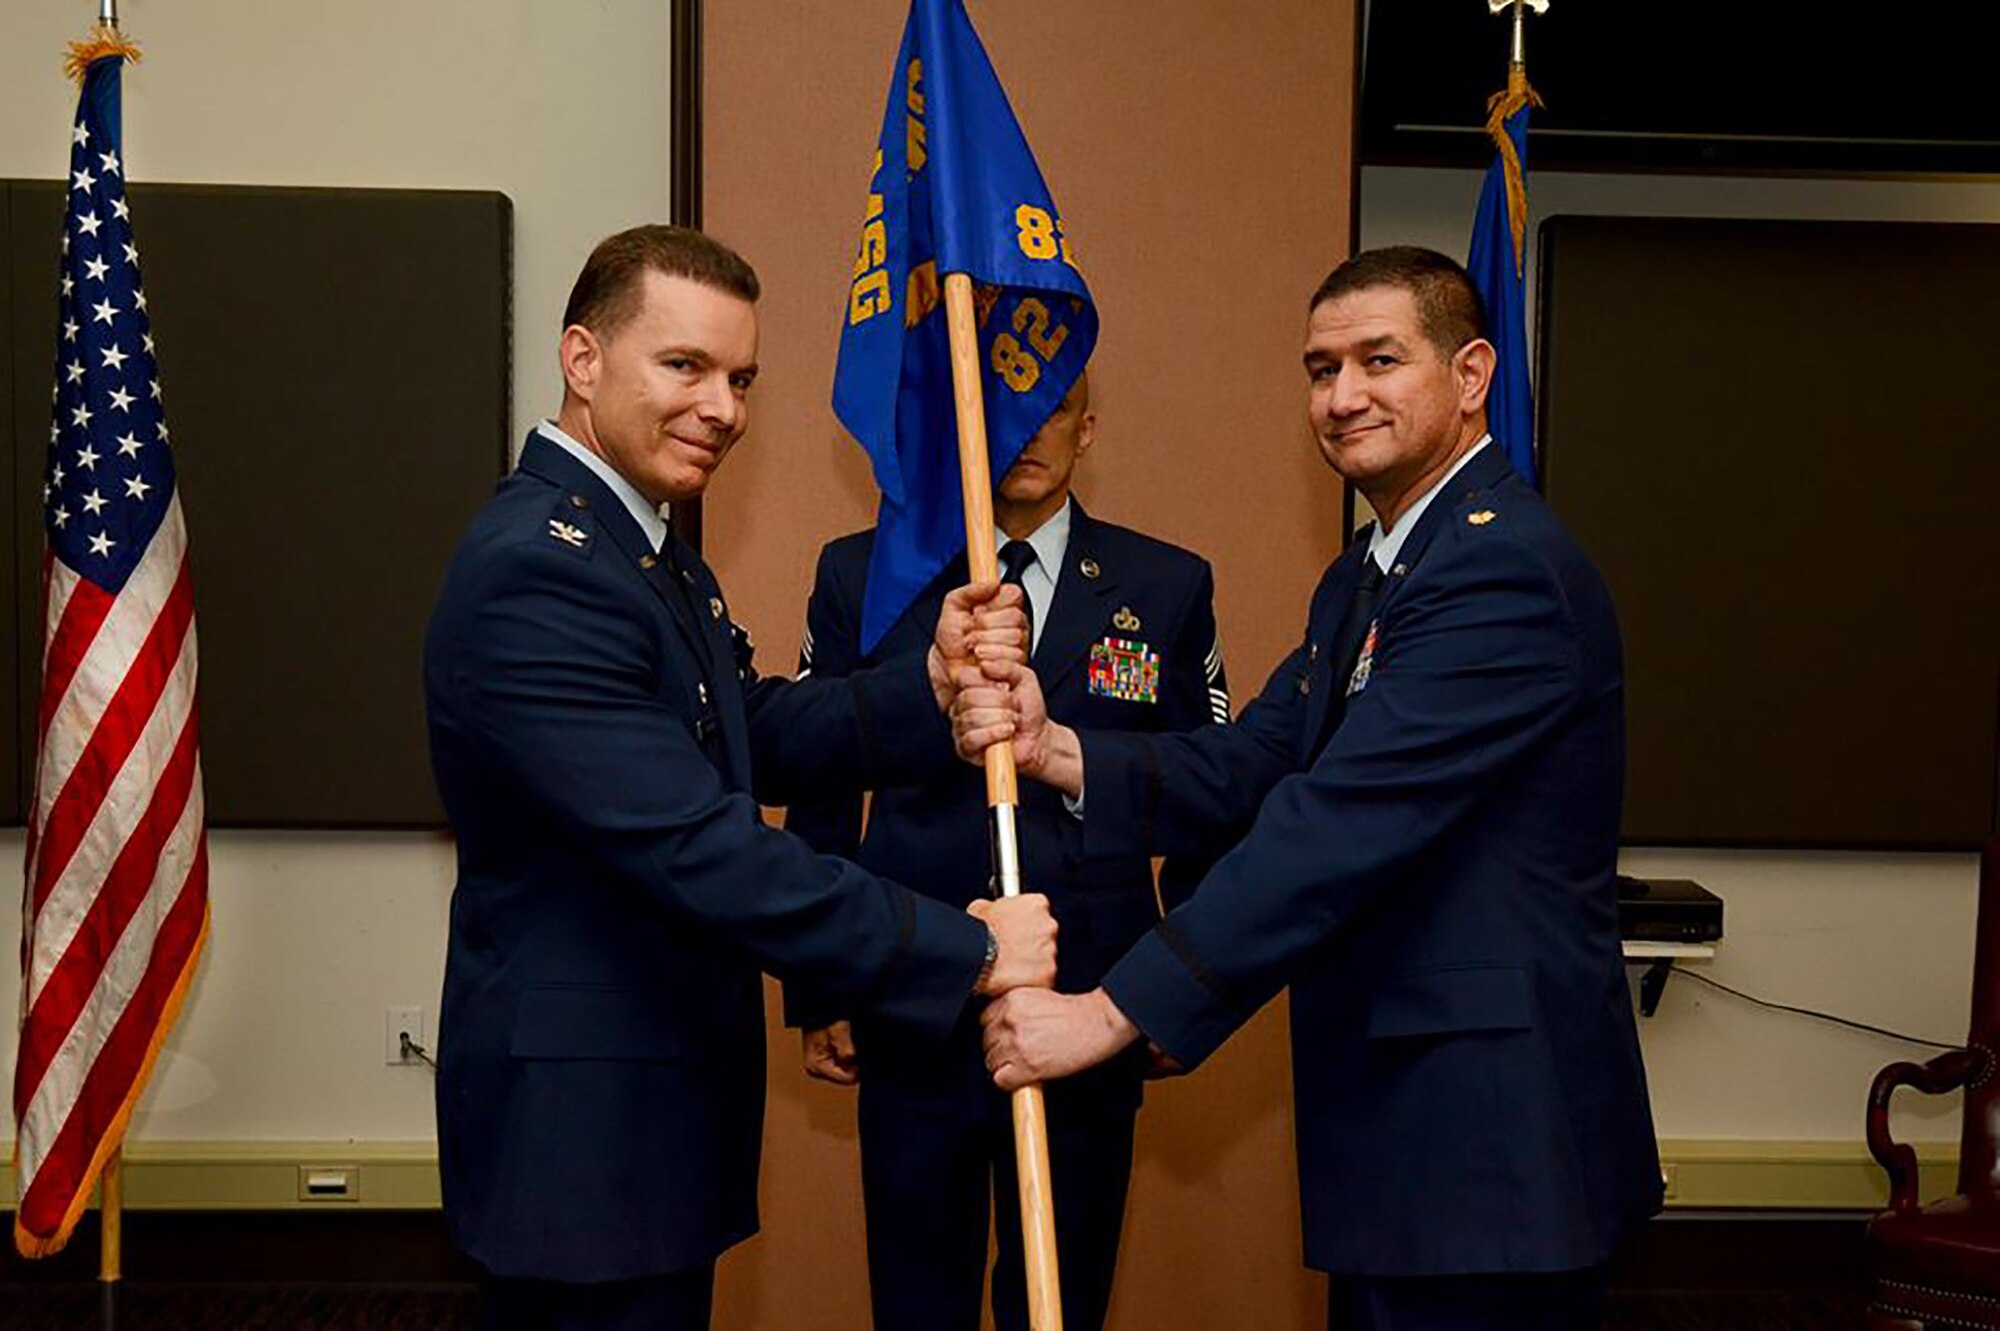 Maj. Charles Marquez accepts the 82nd Aerial Port Squadron guidon from Col. Roderick T. Grunwald, 349th Mission Support Group commander, during an assumption of command ceremony at Travis Air Force Base, Calif., Oct. 14, 2017.